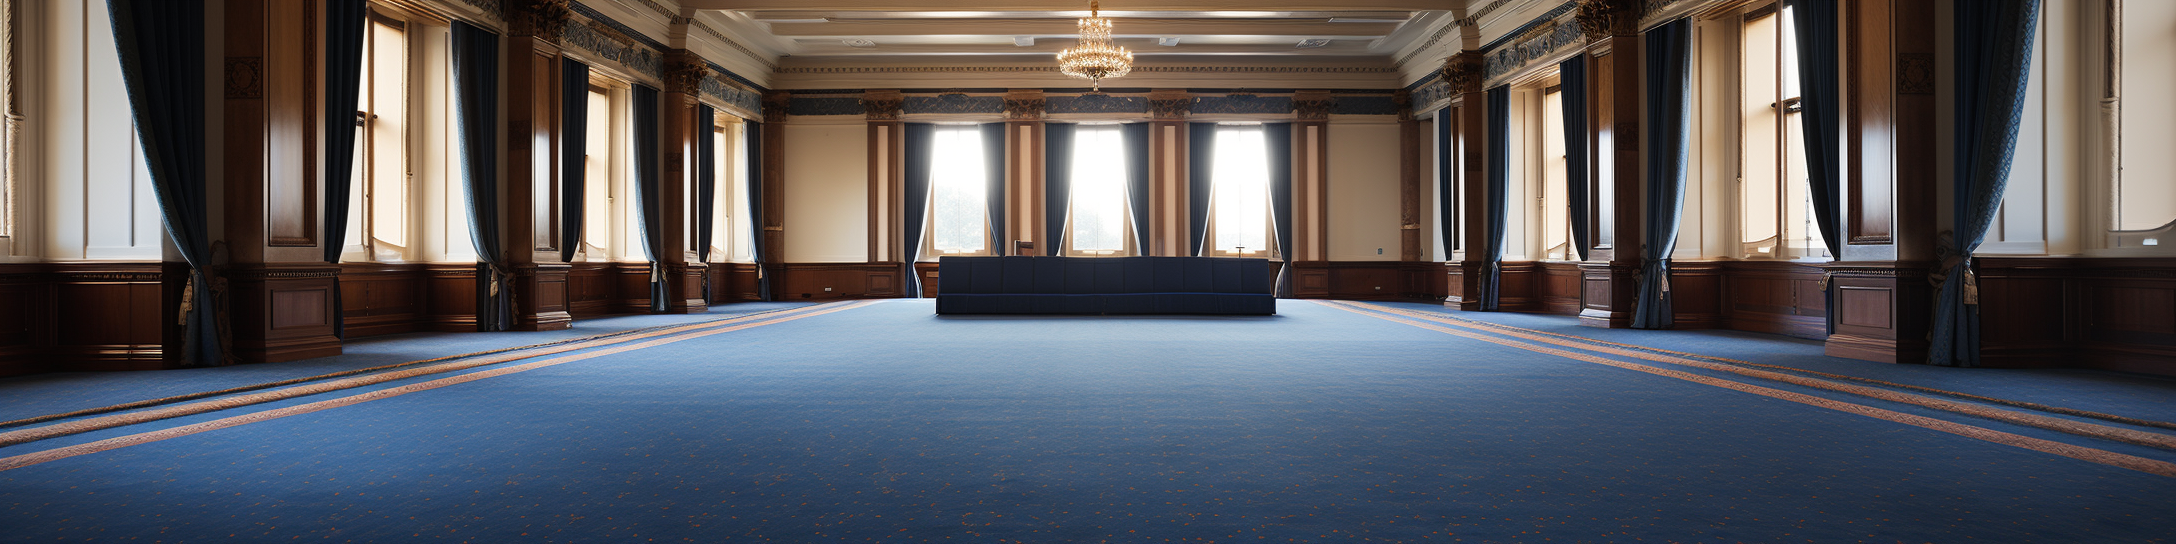 Carpet Cleaning for Government Buildings: Maintaining Clean and Professional Spaces